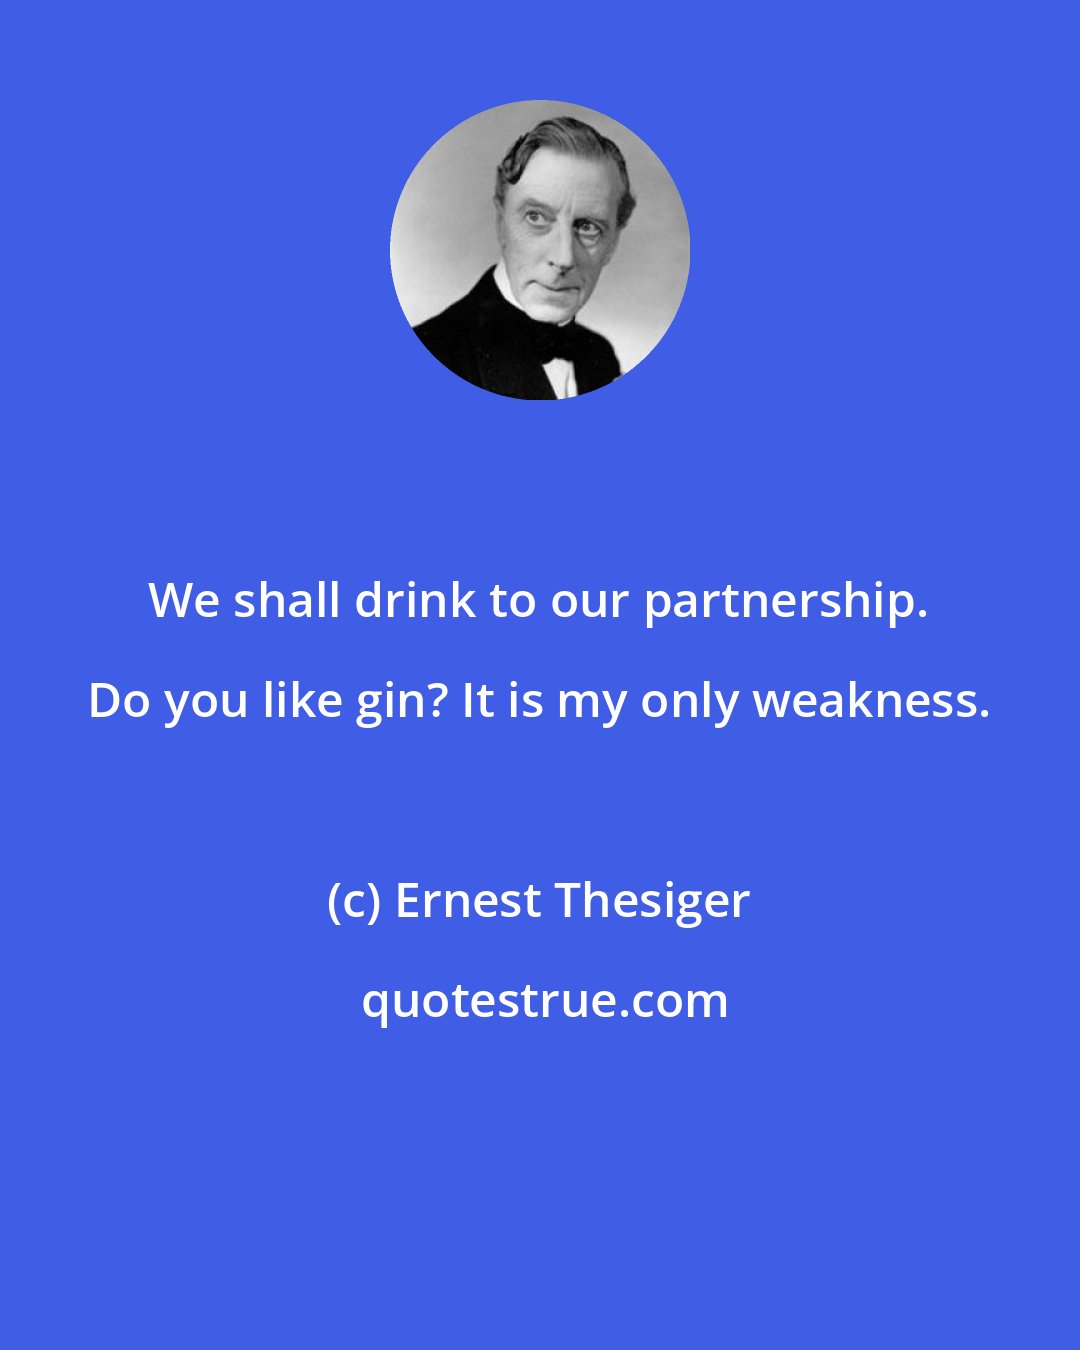 Ernest Thesiger: We shall drink to our partnership. Do you like gin? It is my only weakness.